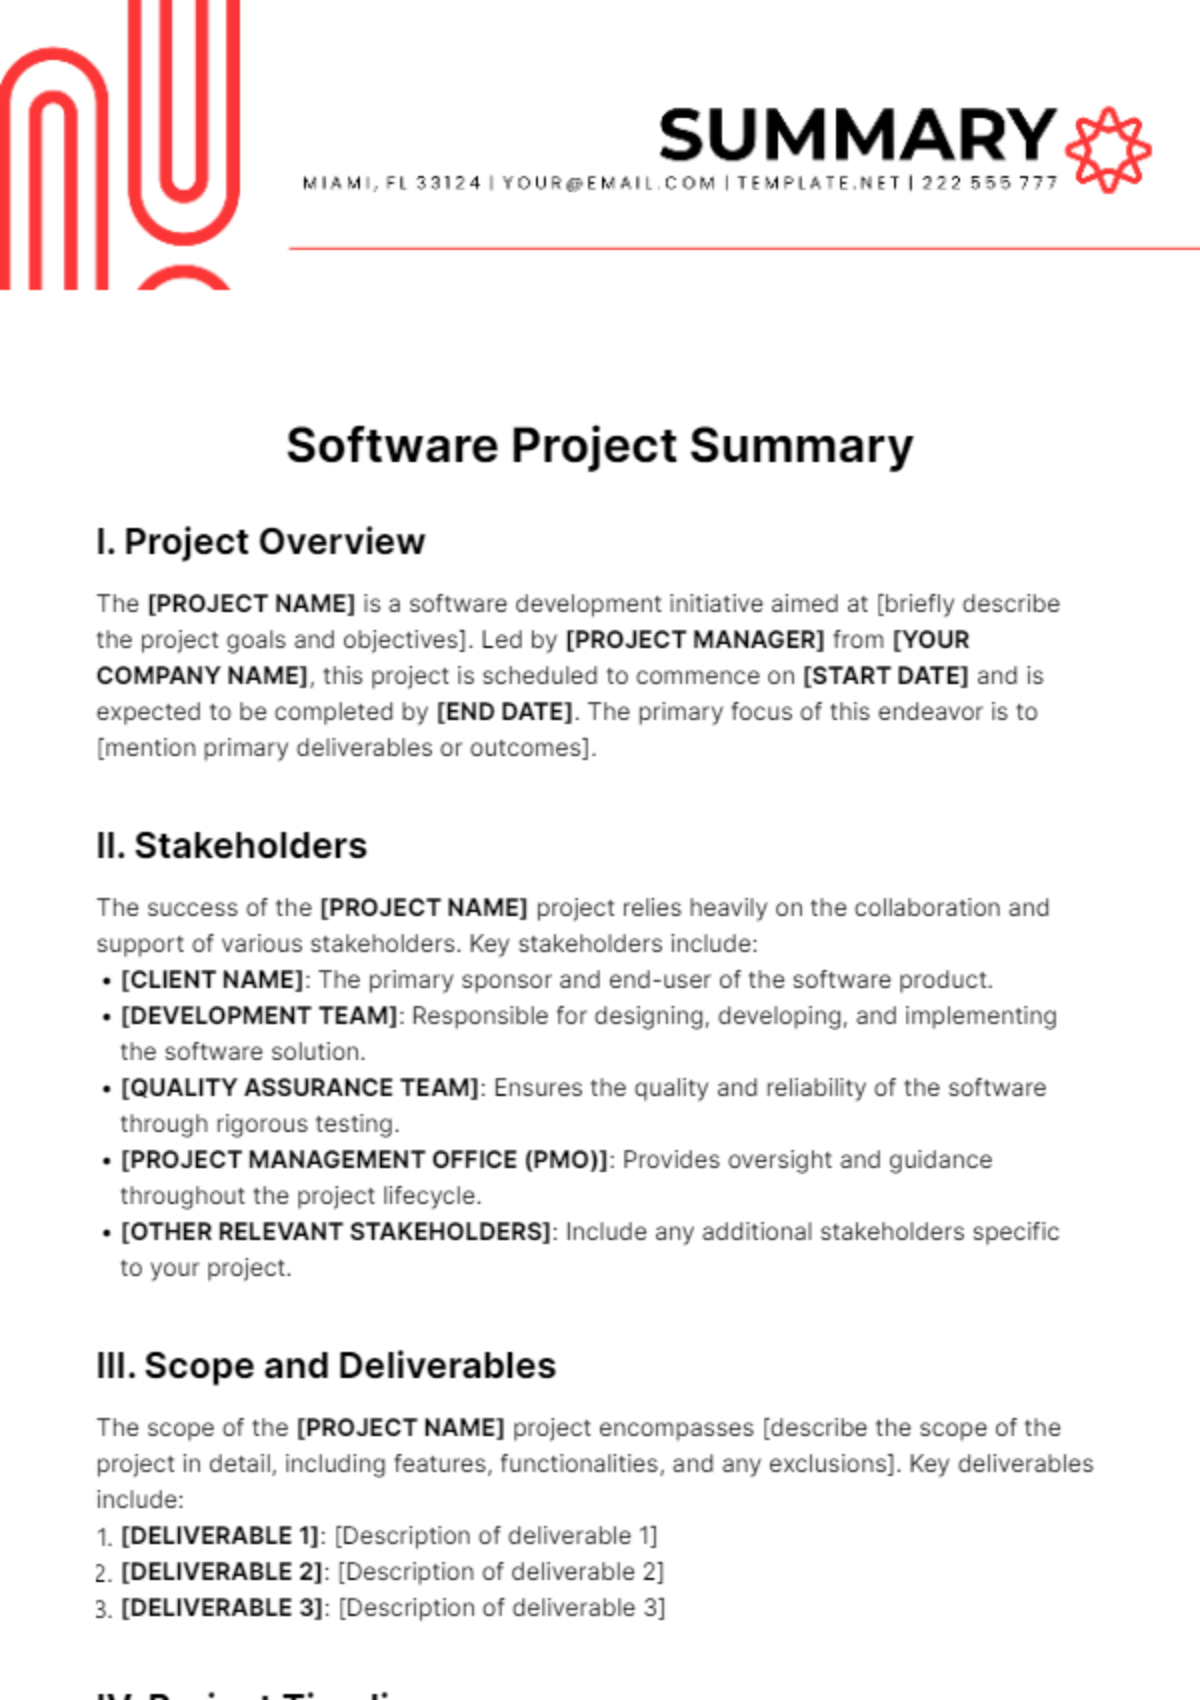 Software Project Summary Template